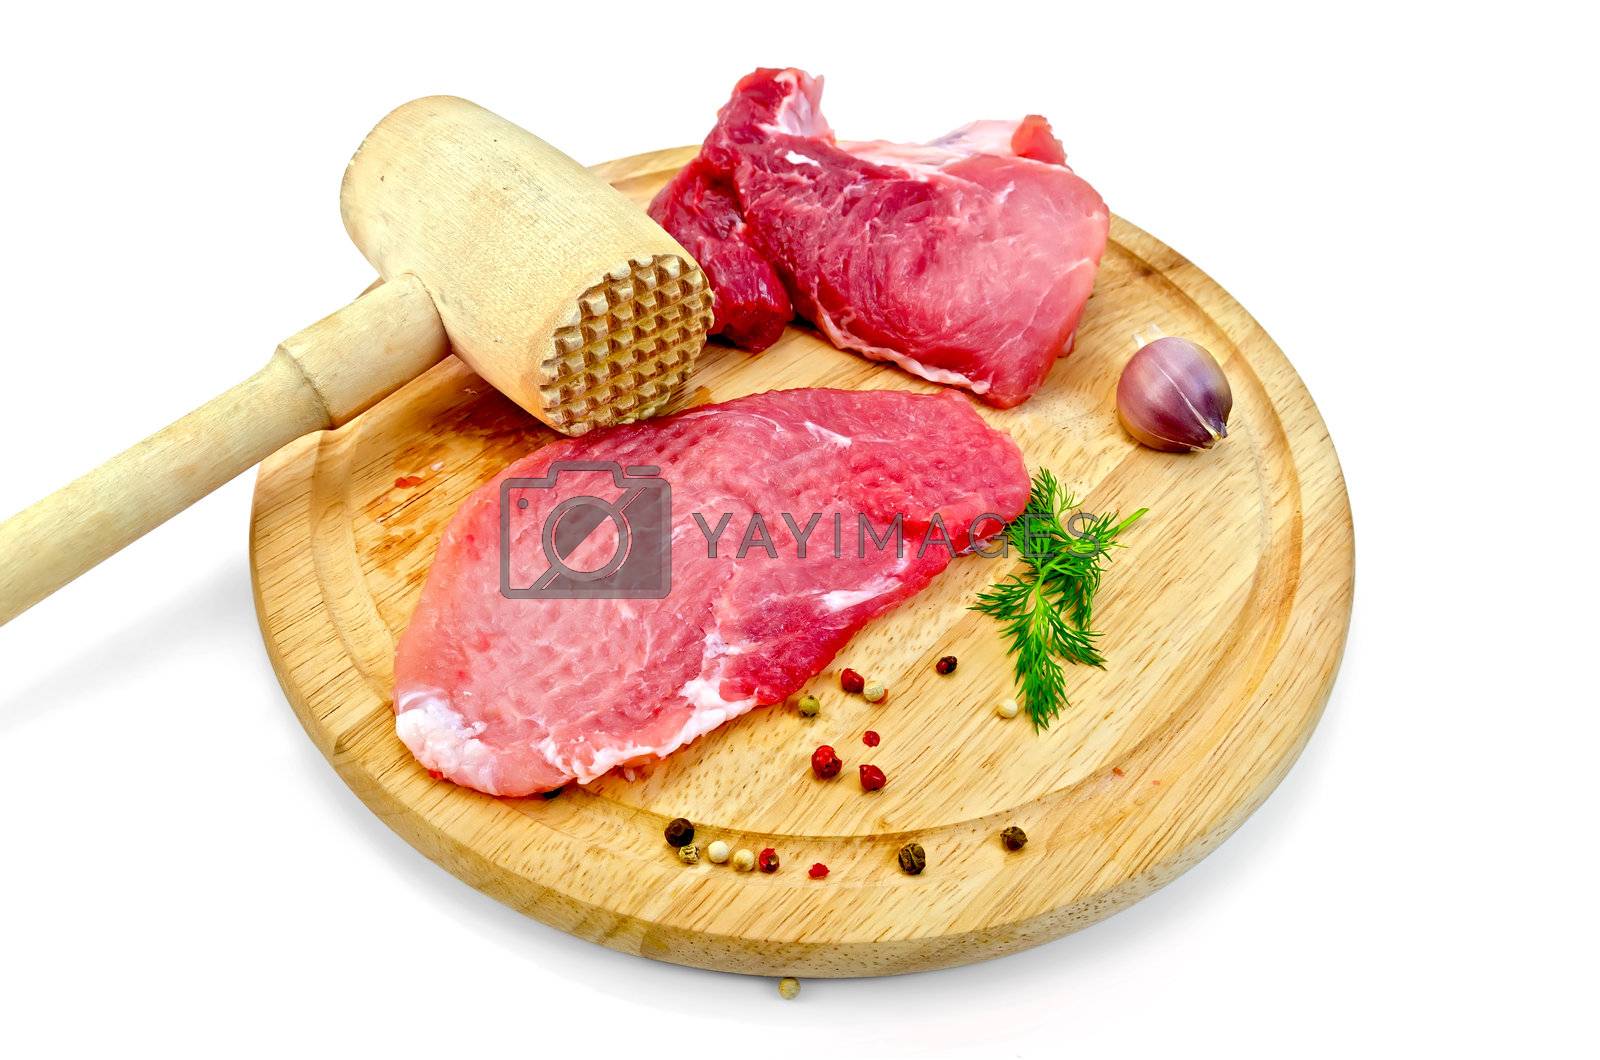 Royalty free image of Meat repulsed with wooden mallet by rezkrr